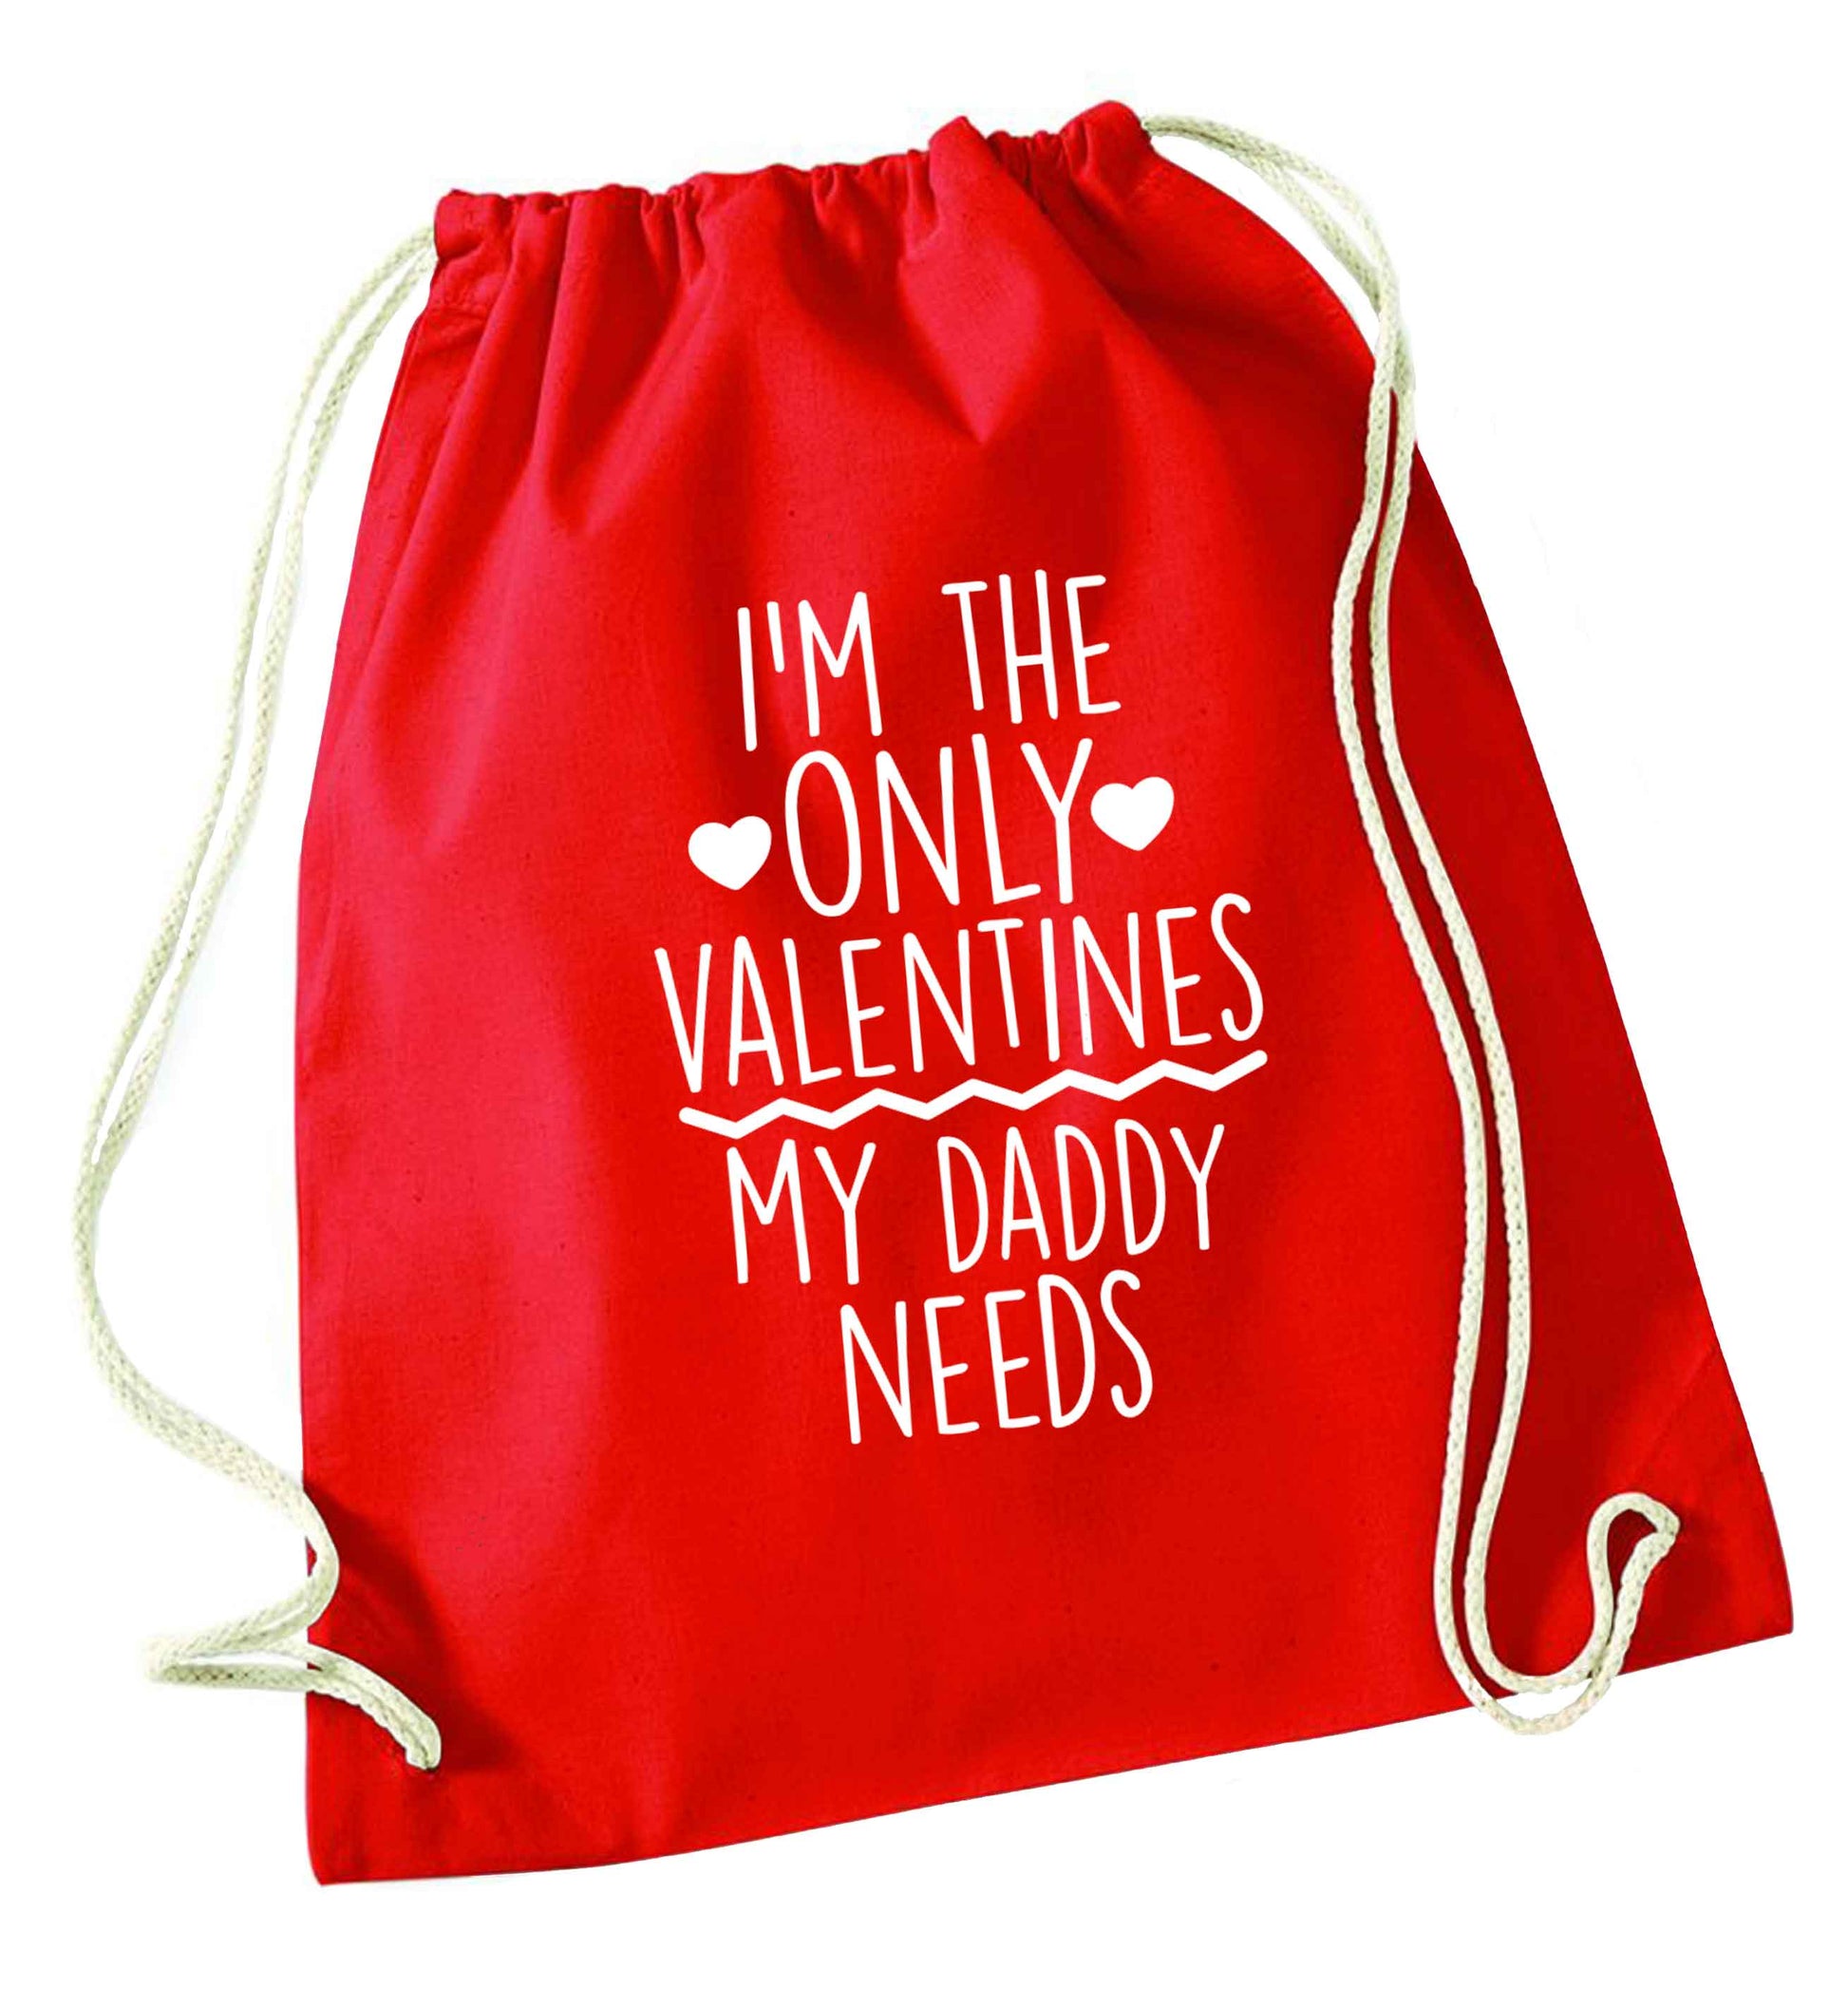 I'm the only valentines my daddy needs red drawstring bag 